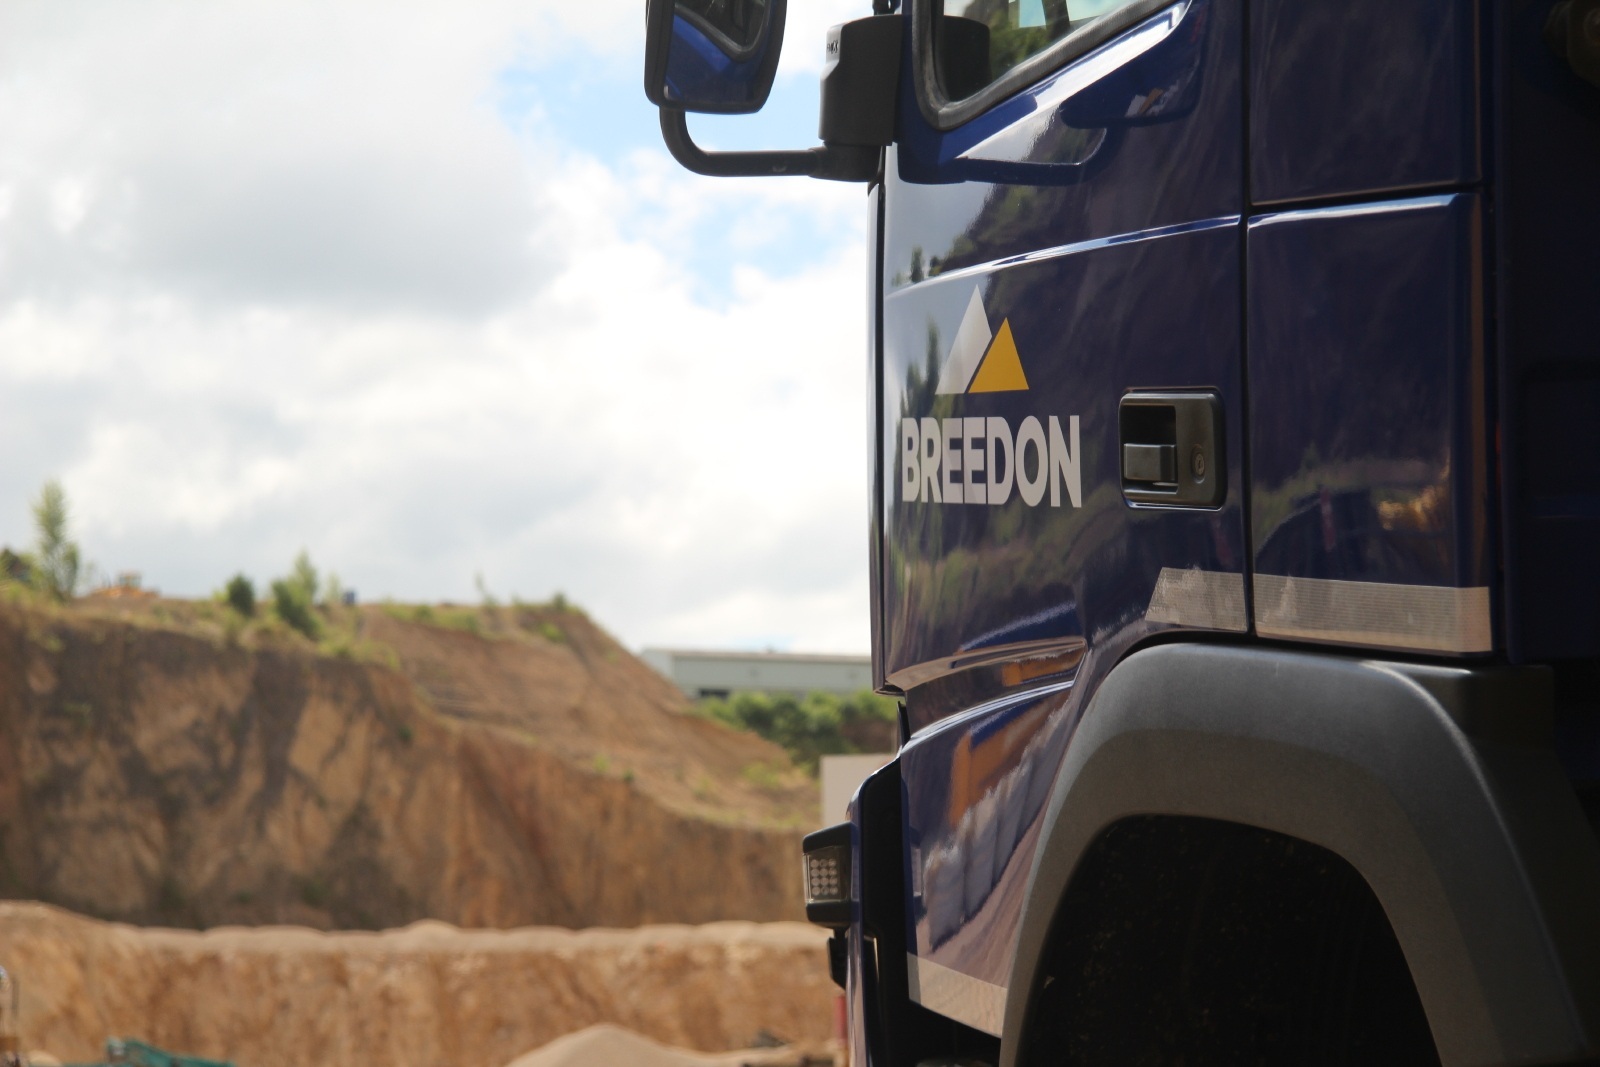 Breedon Group vehicles are a familiar sight around the north and north-east.